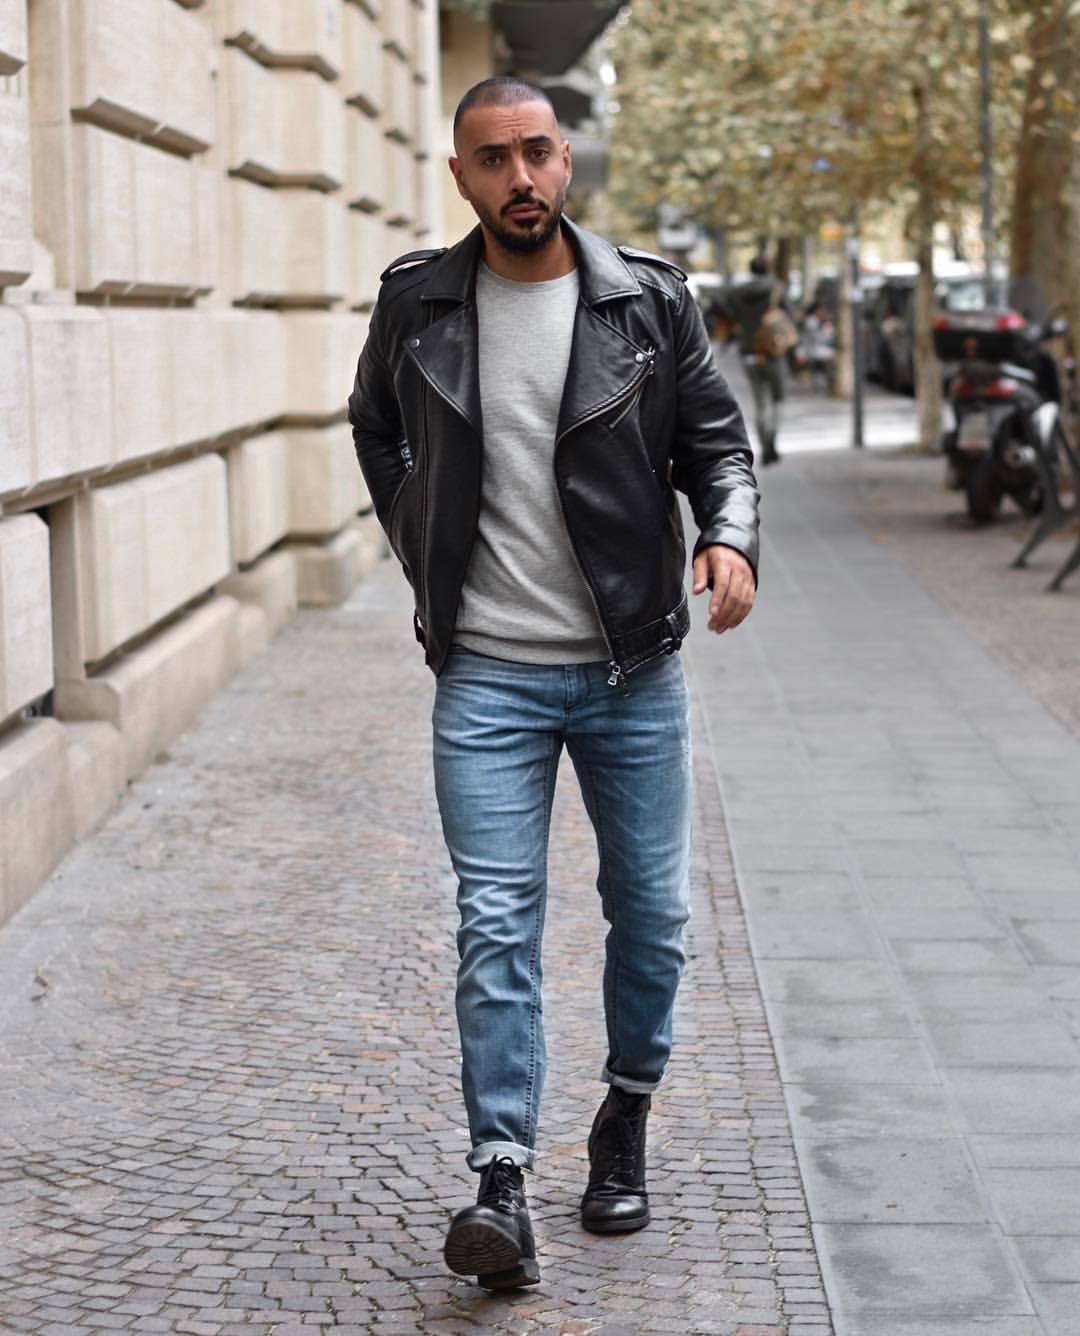 Can a leather jacket be paired with leather pants? - Quora